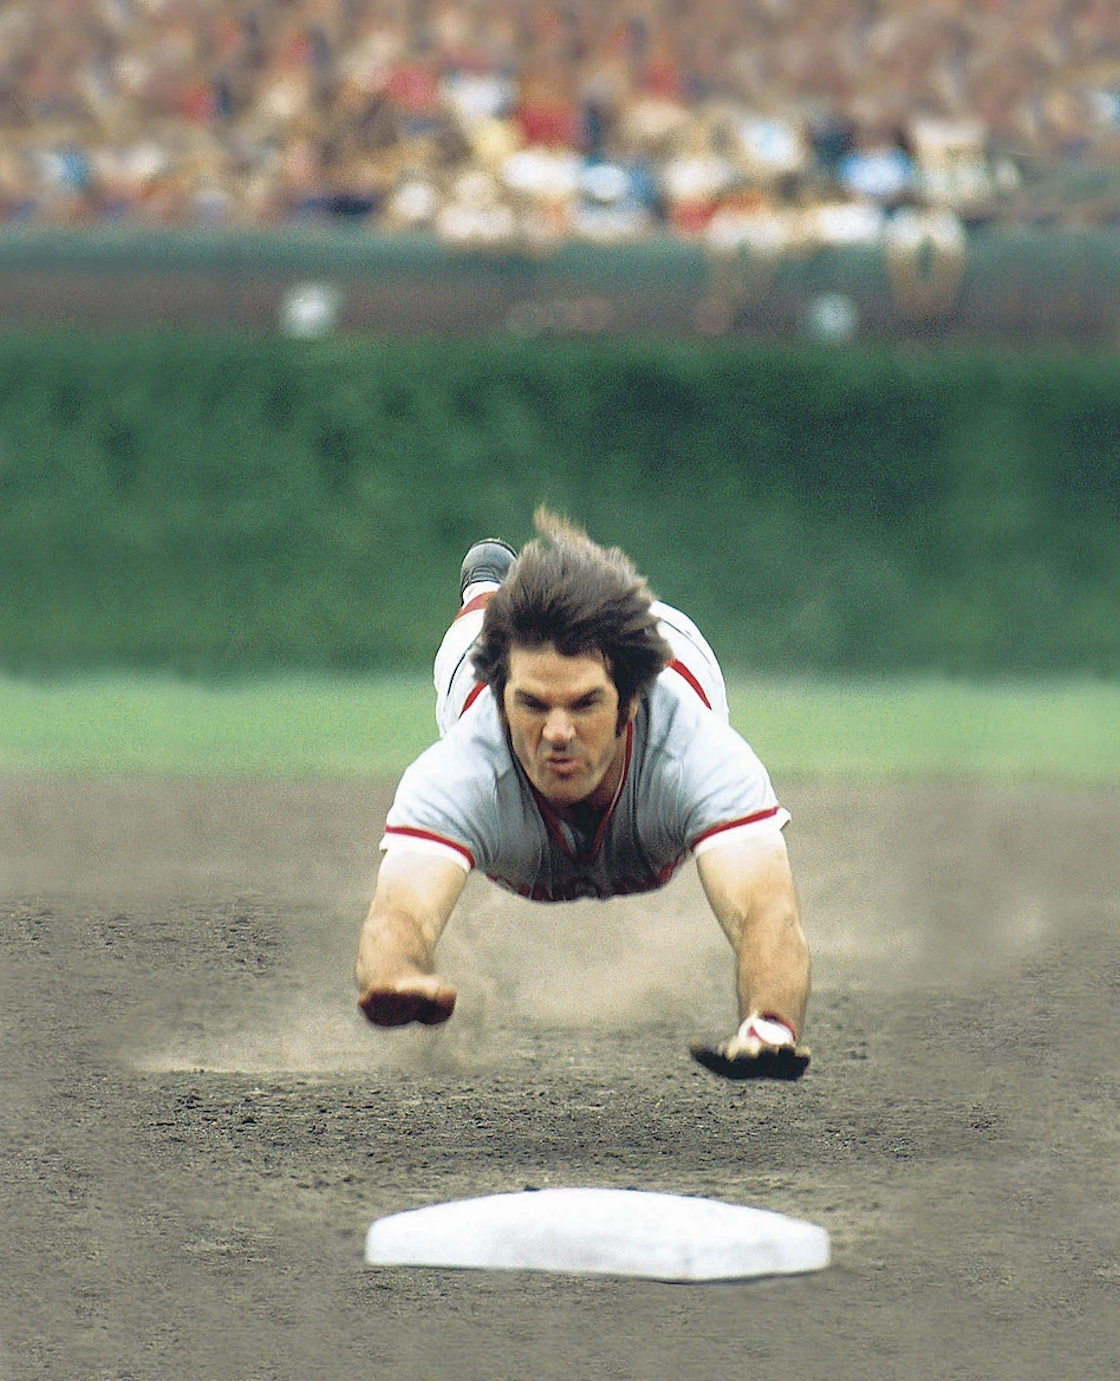 Cubs vs. Reds, 1975. Pete Rose with his patented head-first slide. Photo by: Heinz Kluetmeier.